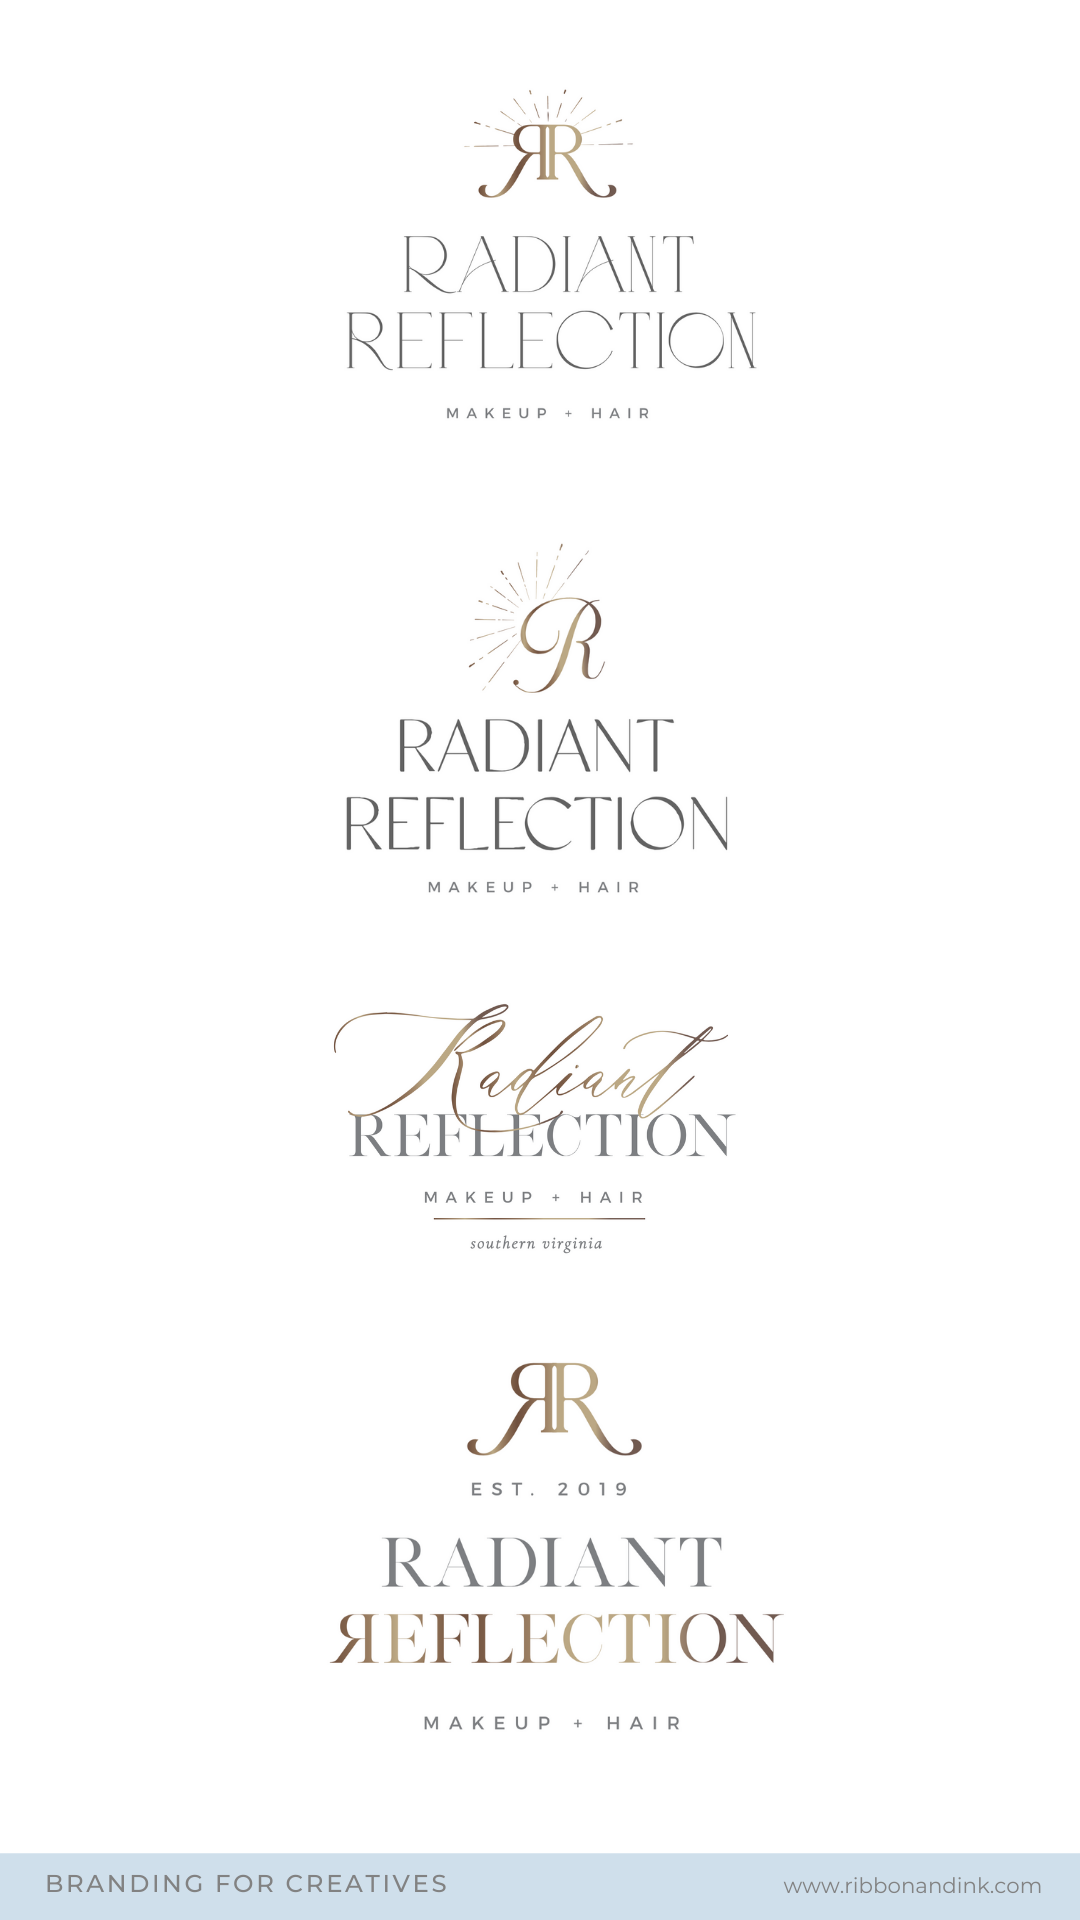 branding for wedding professionals , businesses, creatives / logo concepts / makeup artist / hair / gold / modern/ high end / luxury